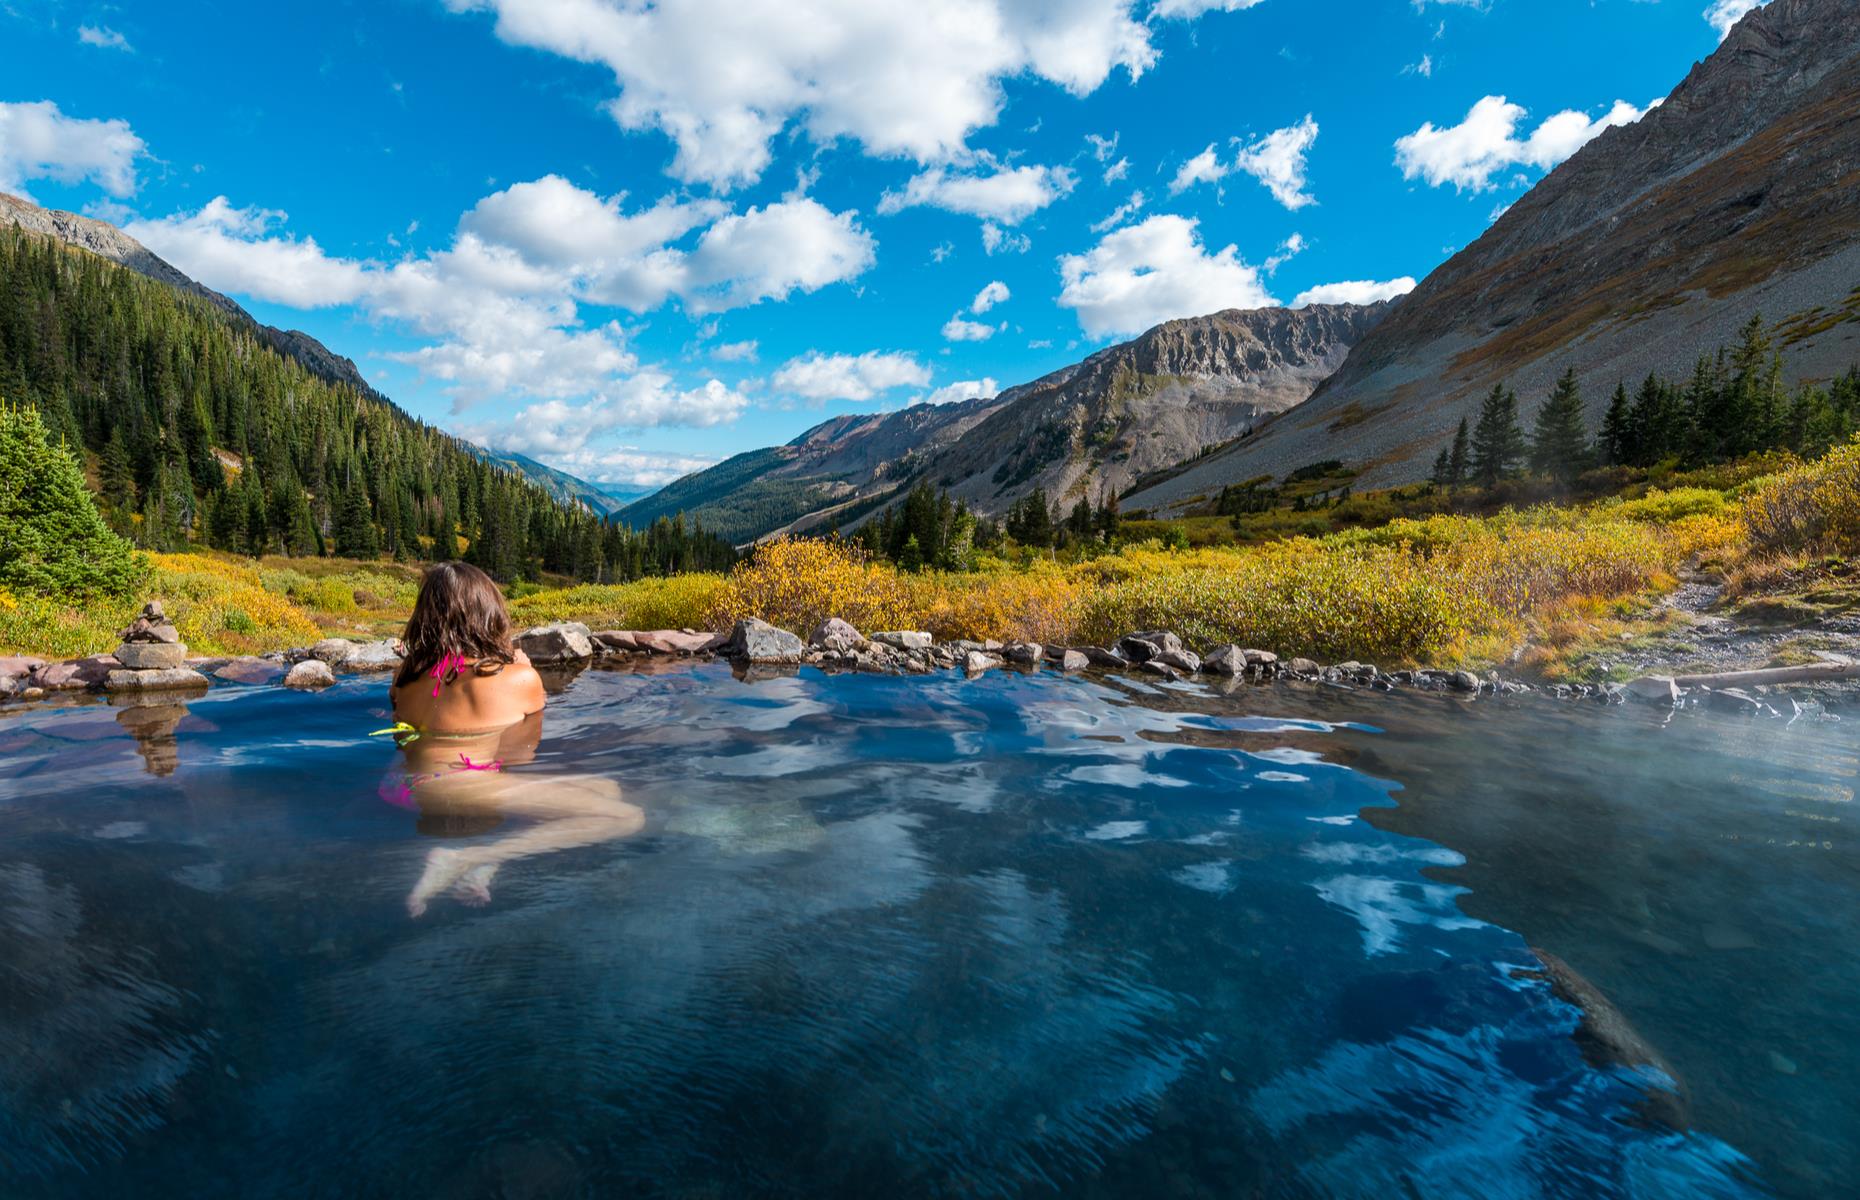 It's an eight-mile (13km) hike to Conundrum Hot Springs, but the stunning mountain meadows and aspen forests make the hard work worthwhile. The reward? You’ll get to lower yourself into a deliciously warm thermal pool and rest while you soak up breathtaking views. You can camp nearby, but the use of bear canisters is enforced. Find the Conundrum Creek Trailhead off Castle Creek Road, south of Aspen. Go between spring and mid-autumn, when the snow has melted.